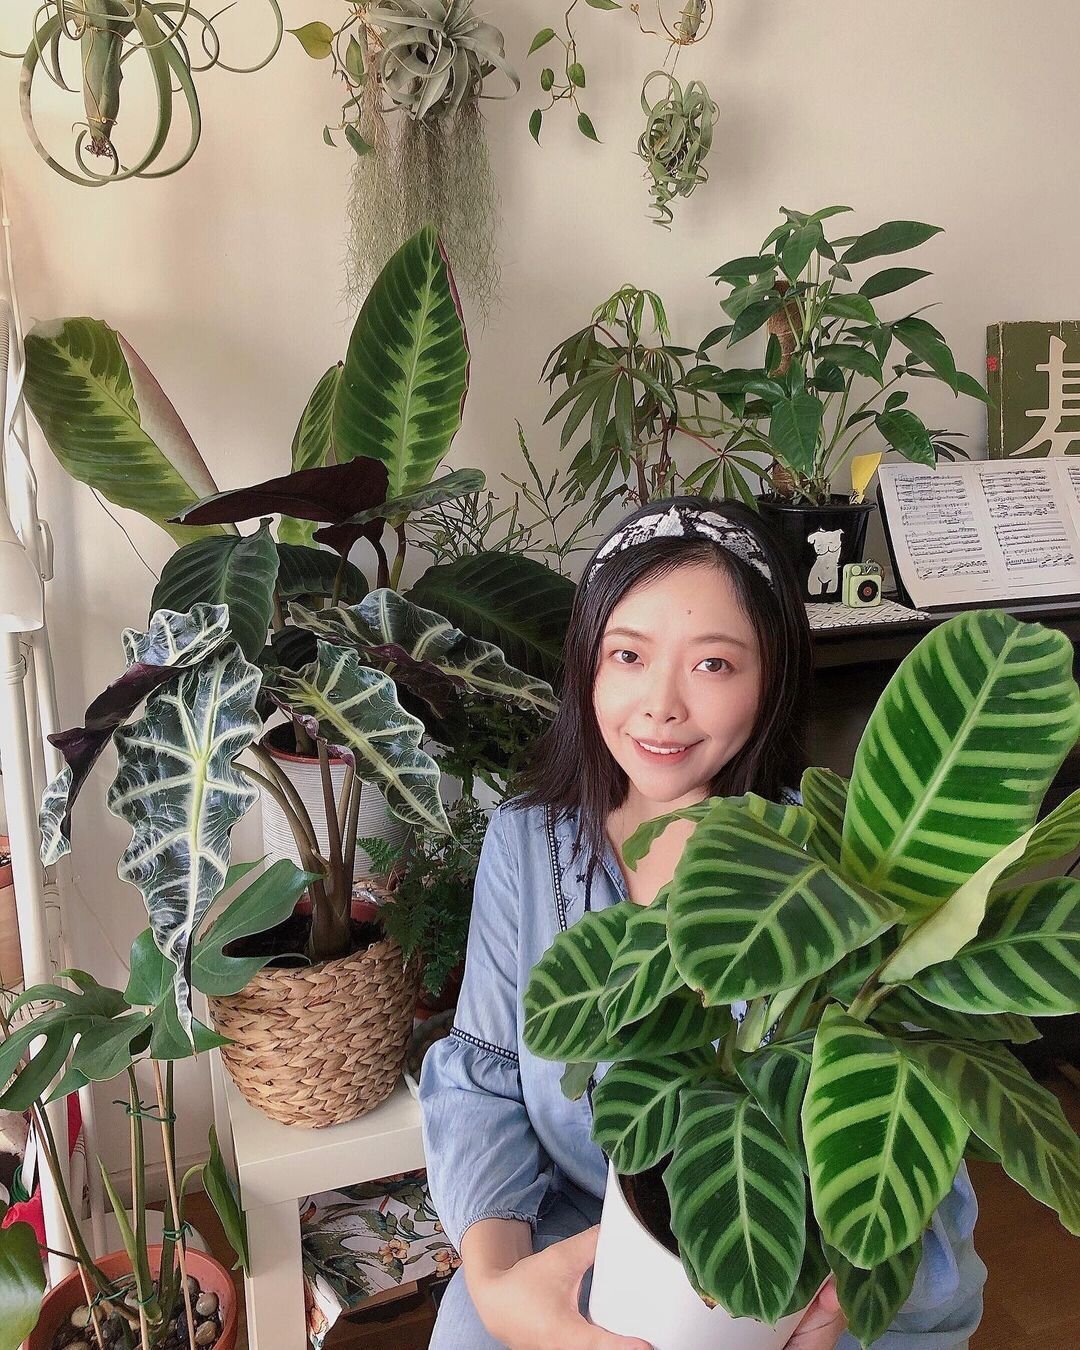 We're featuring Crazy Plant People from all over the world. Get involved, follow us and tag @crazyplantpeople in your portrait with your favourite plants! Don't forget to add a little story about yourself and why you love plants!
--
Featuring @yishi.